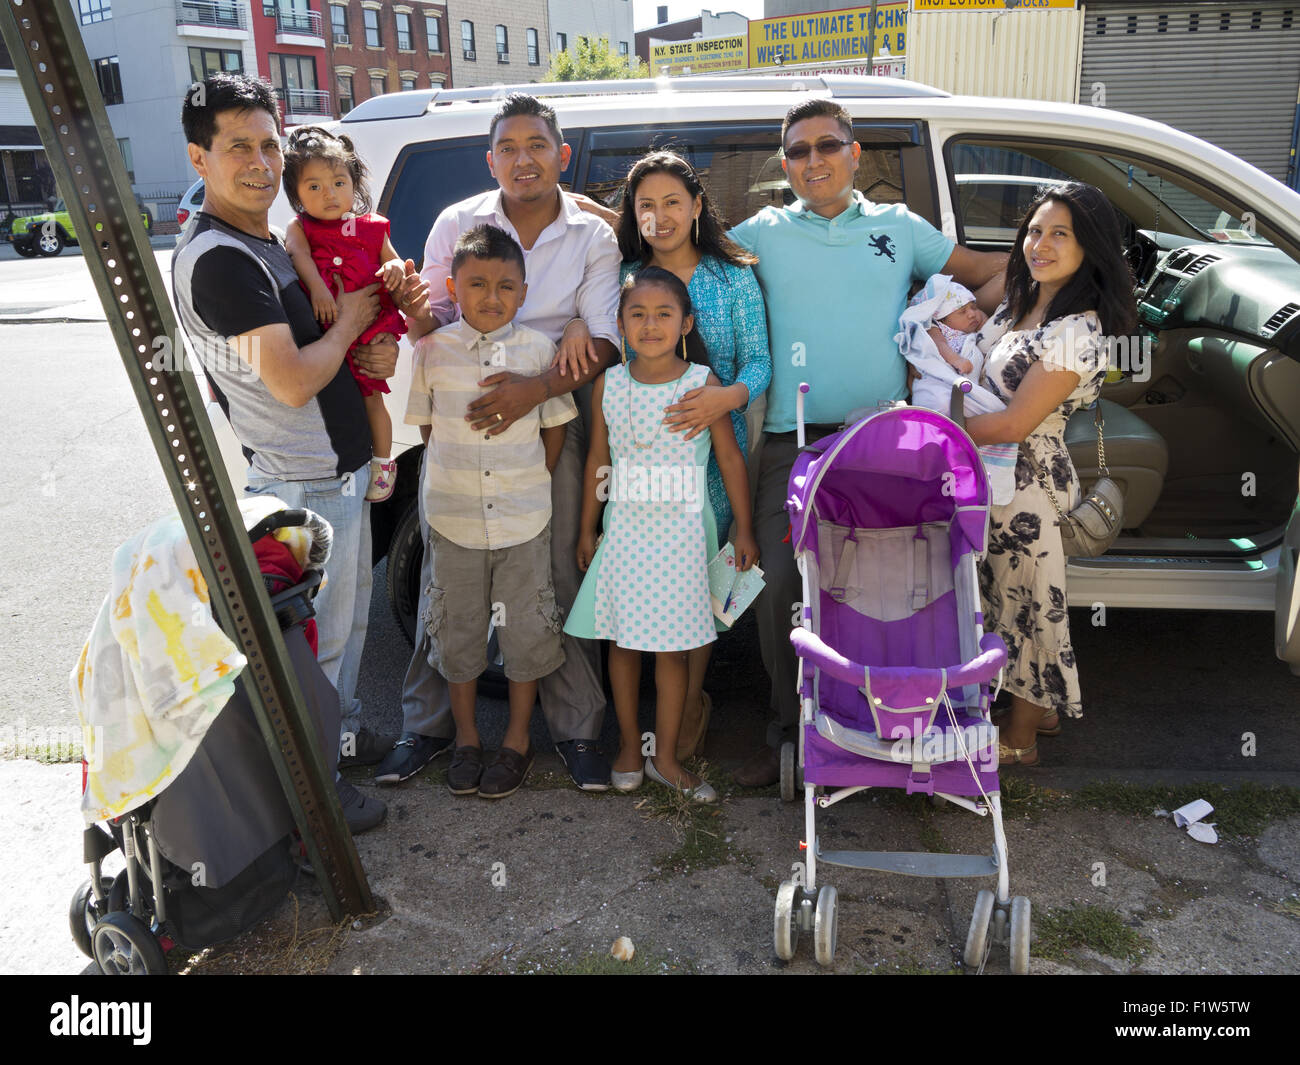 Ecuadorian families outside after church service in the Williamsburg section of Brooklyn, New York. Stock Photo